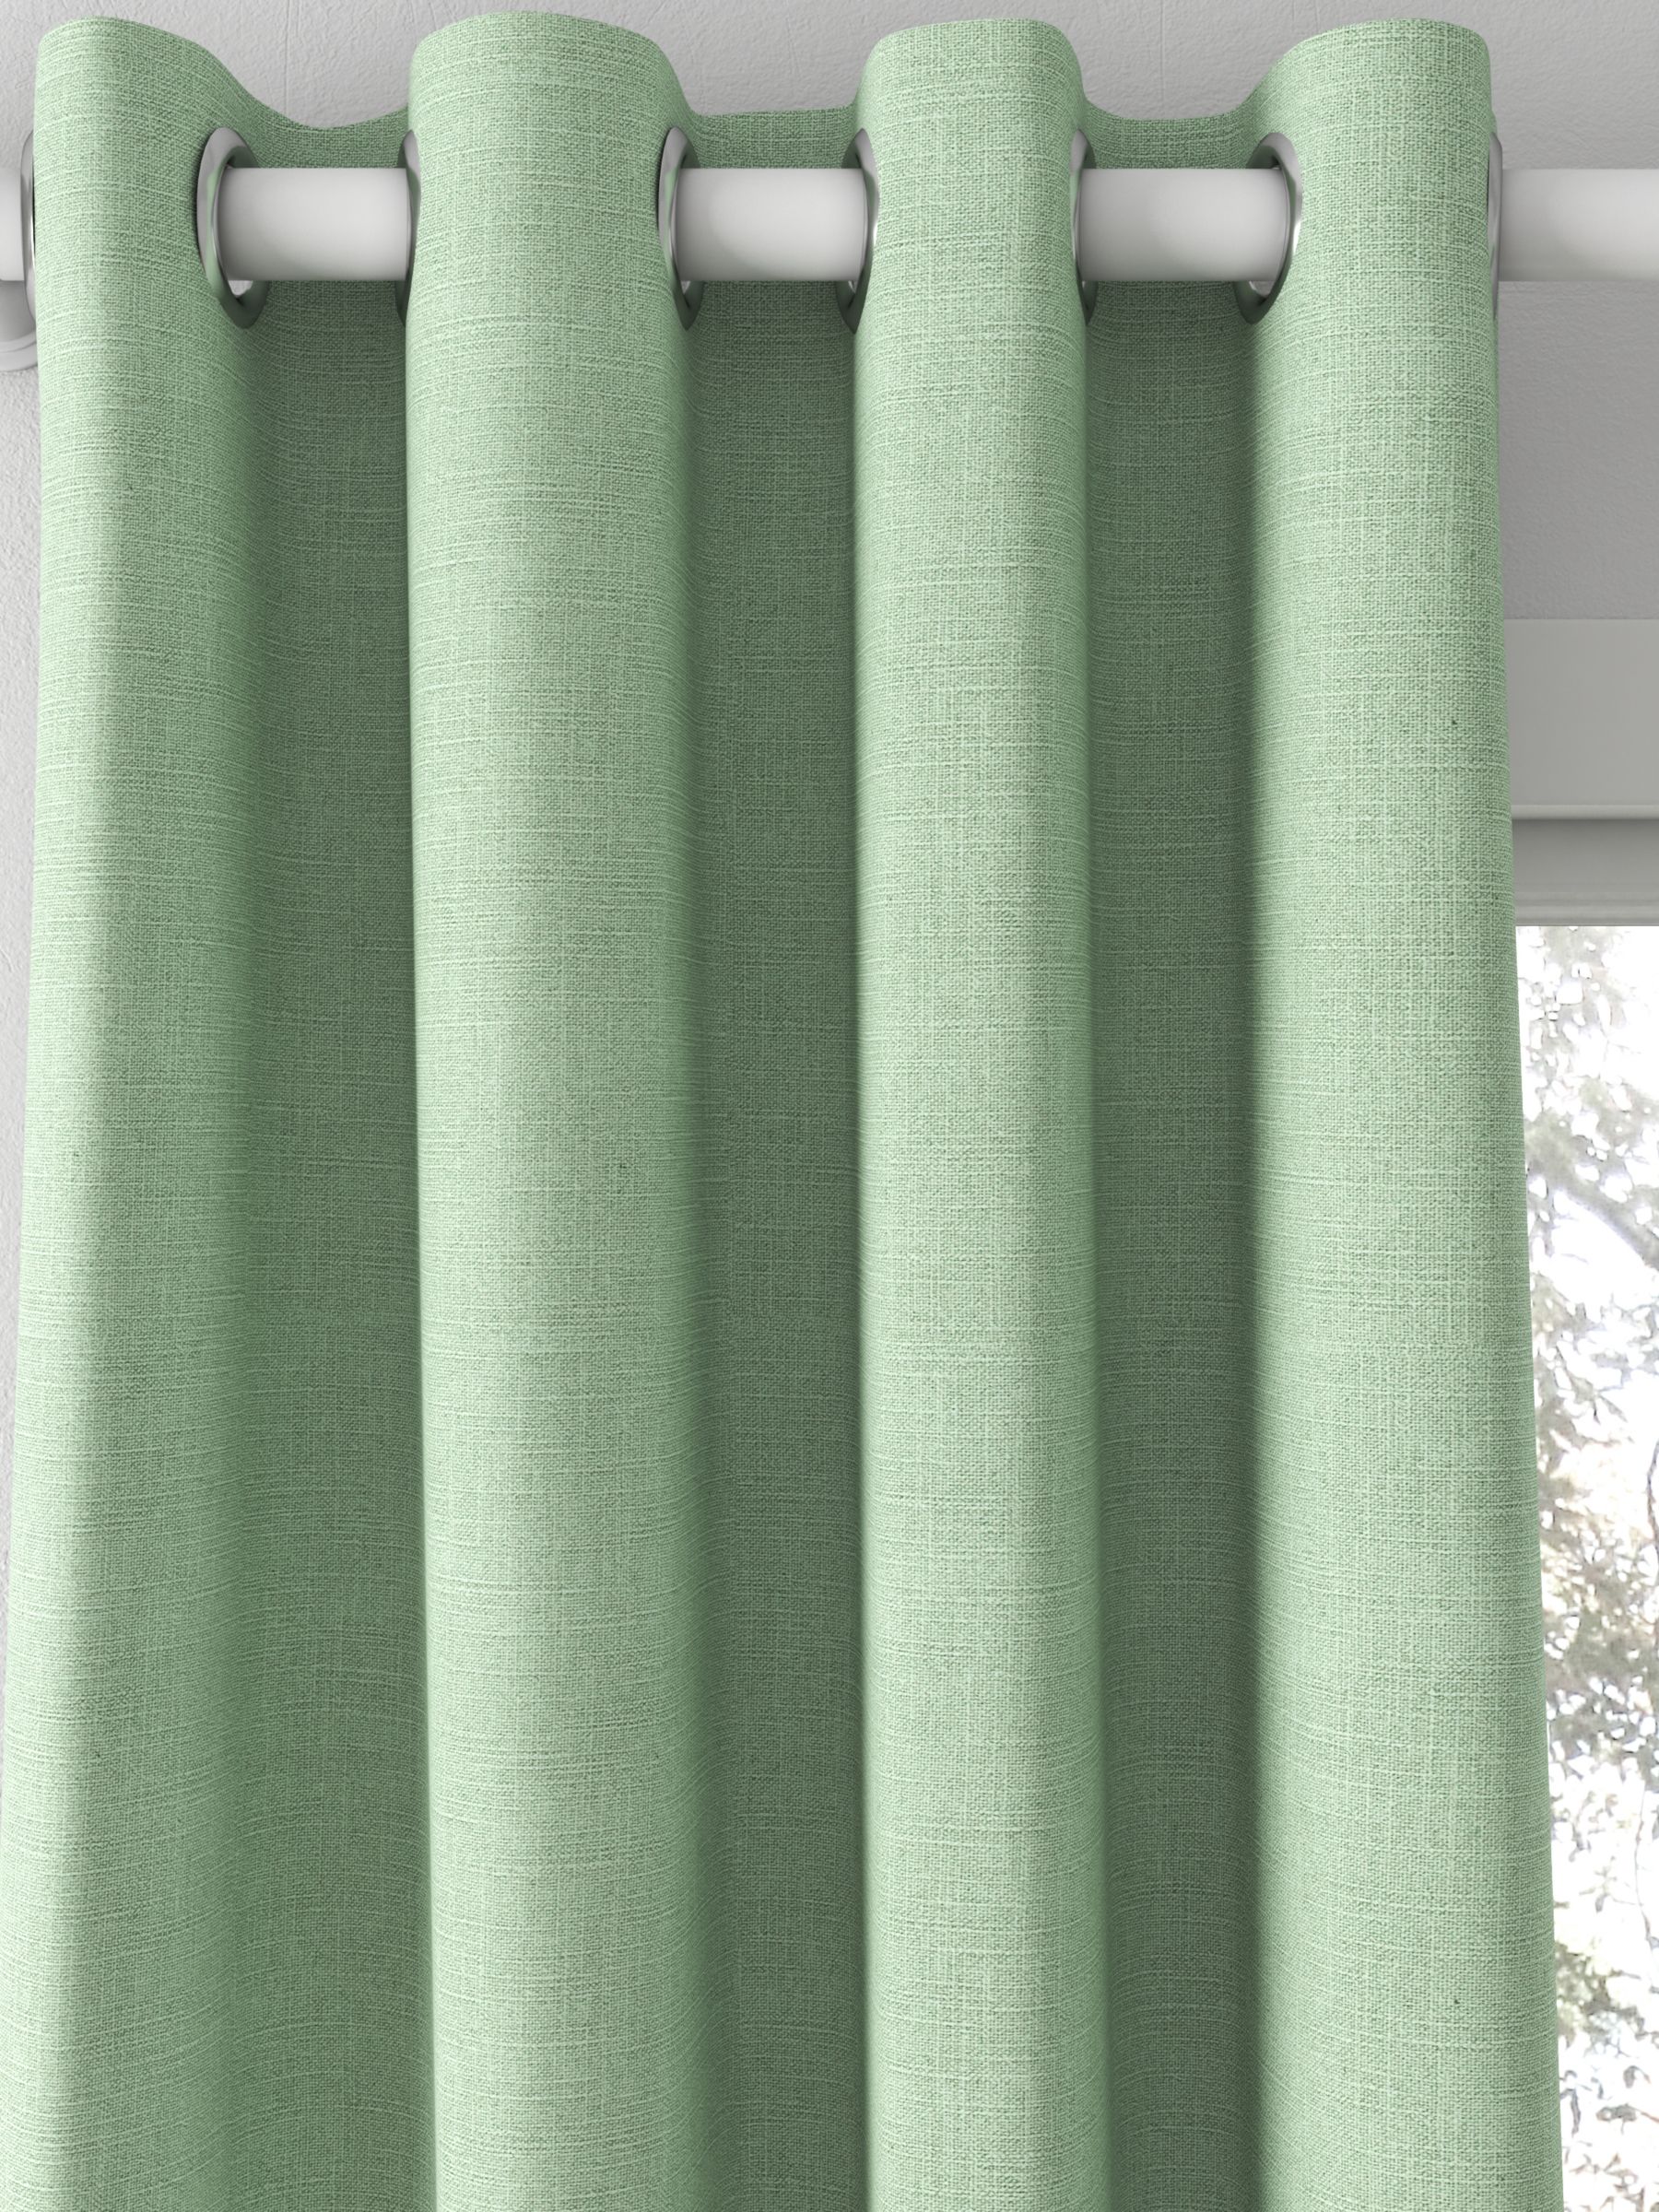 Sanderson Tuscany II Made to Measure Curtains, Silver Mint